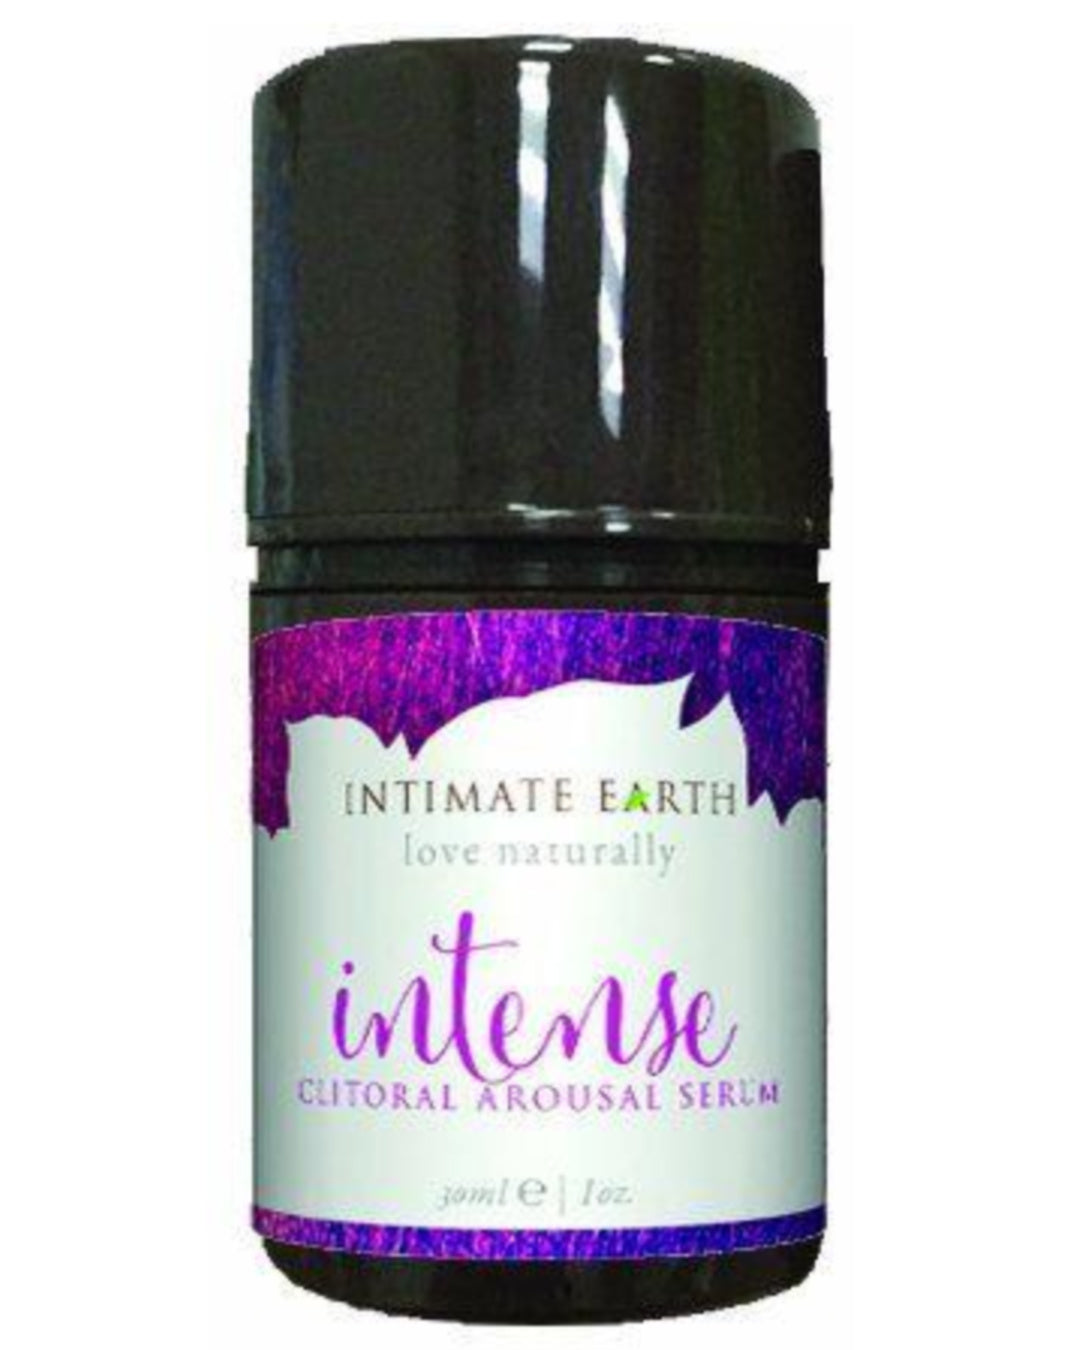 Intimate Earth Intense Clitoral Arousal Gel